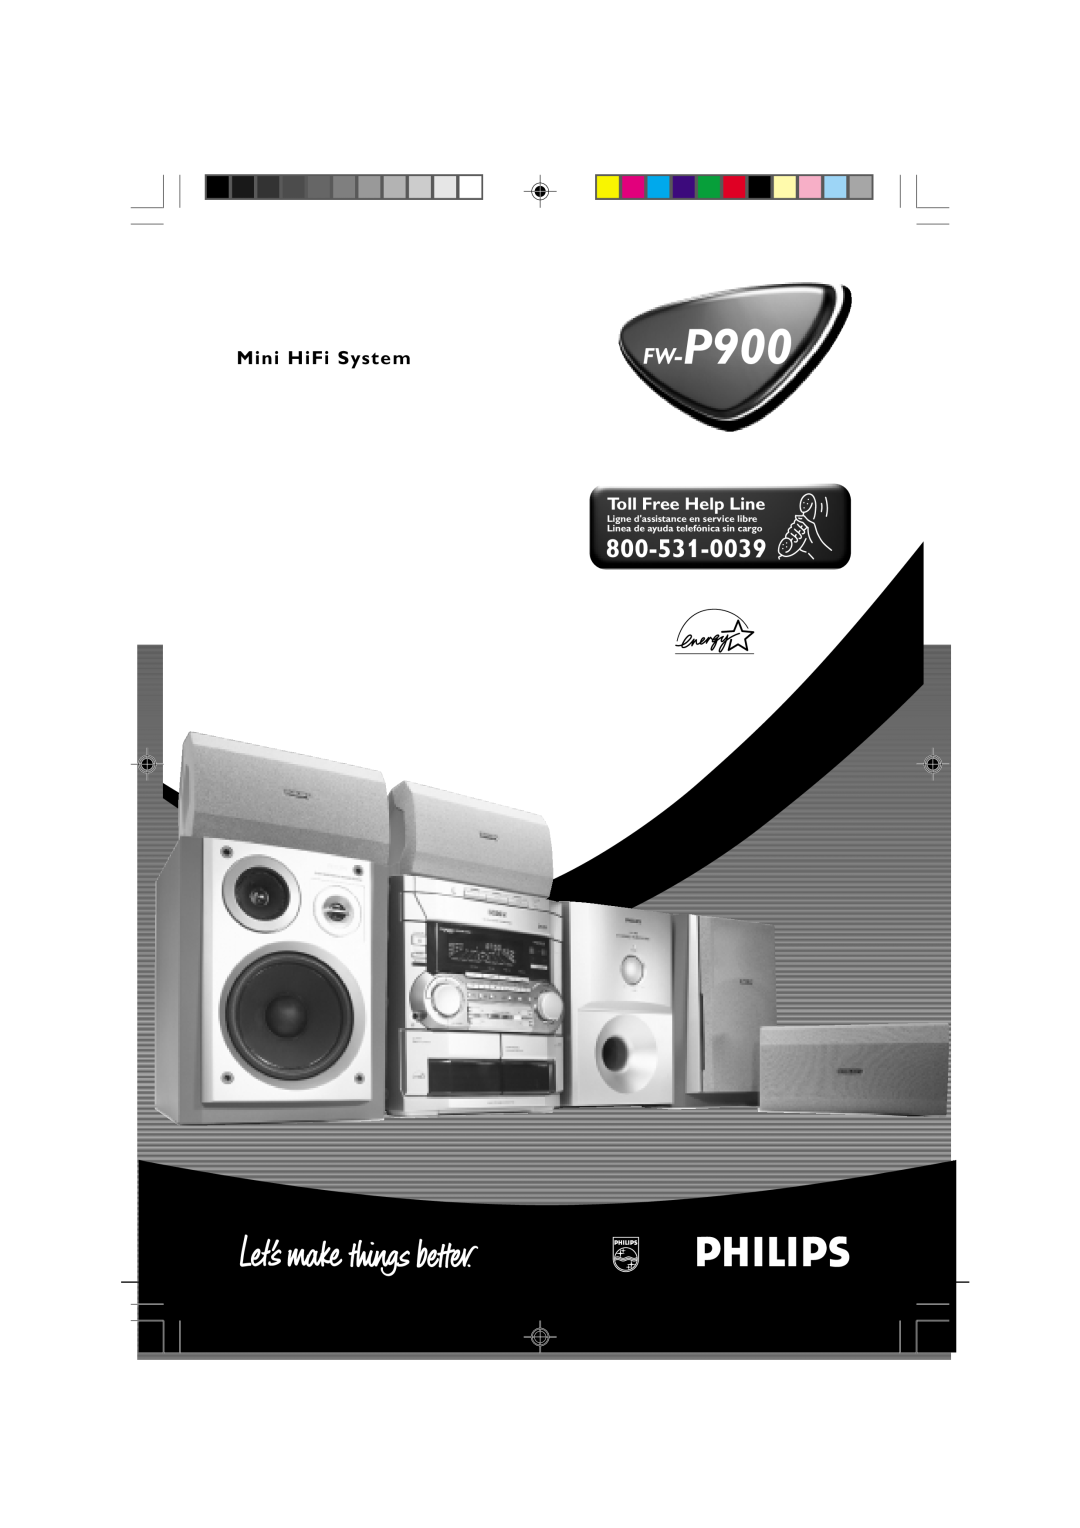 Philips FW-P900 manual Mini HiFi System, Toll Free Help Line, pg 001-033/P900/37-Eng, 12/8/00, 1 52 PM 